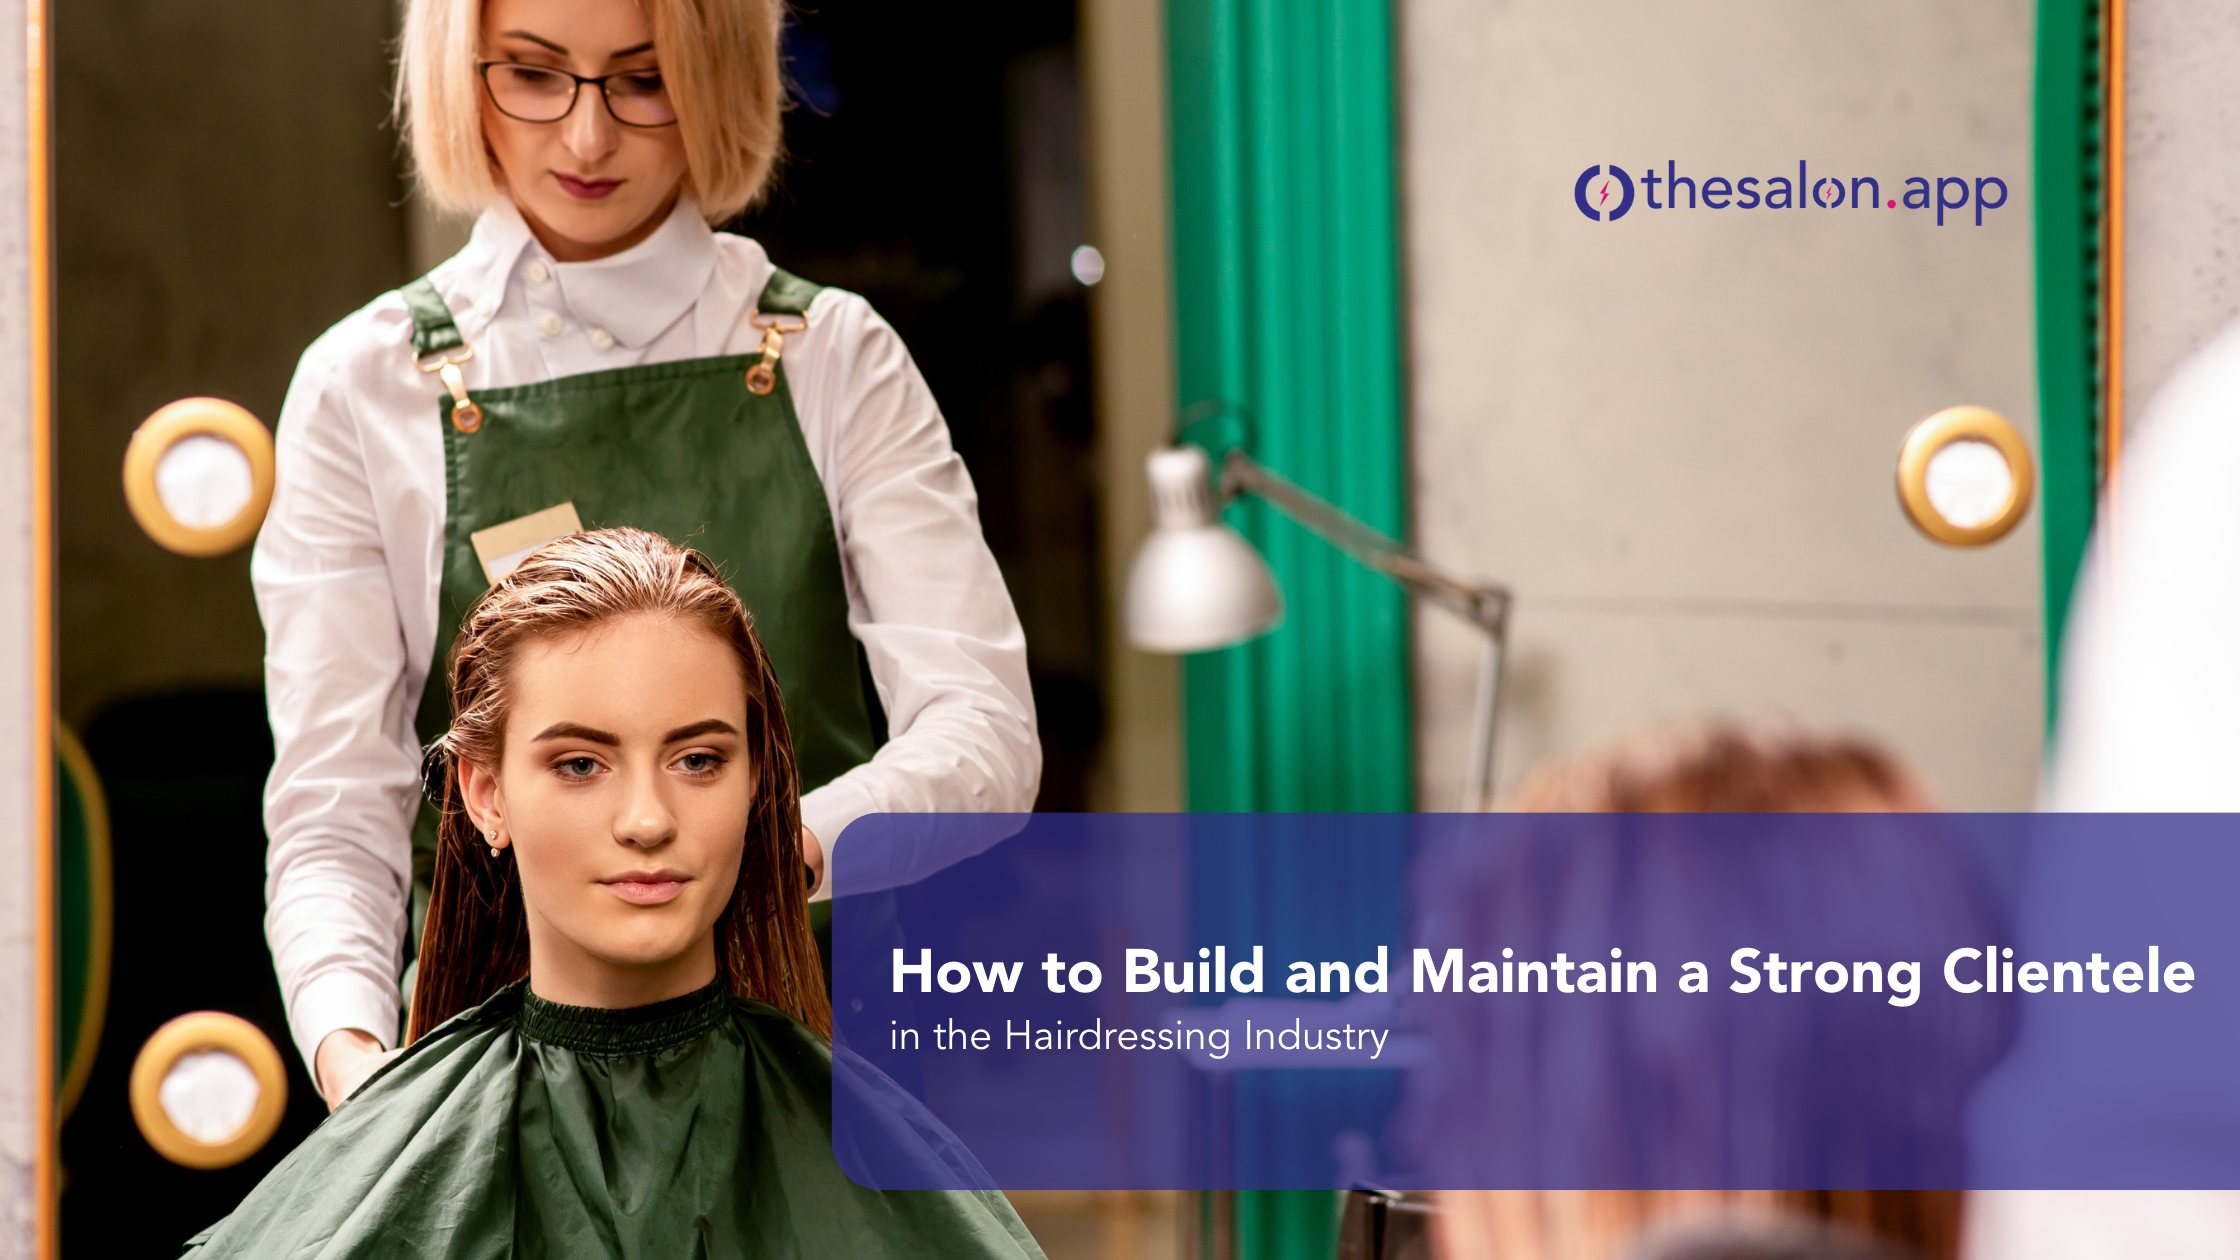 How to build and maintain a strong clientele in the hairdressing industry